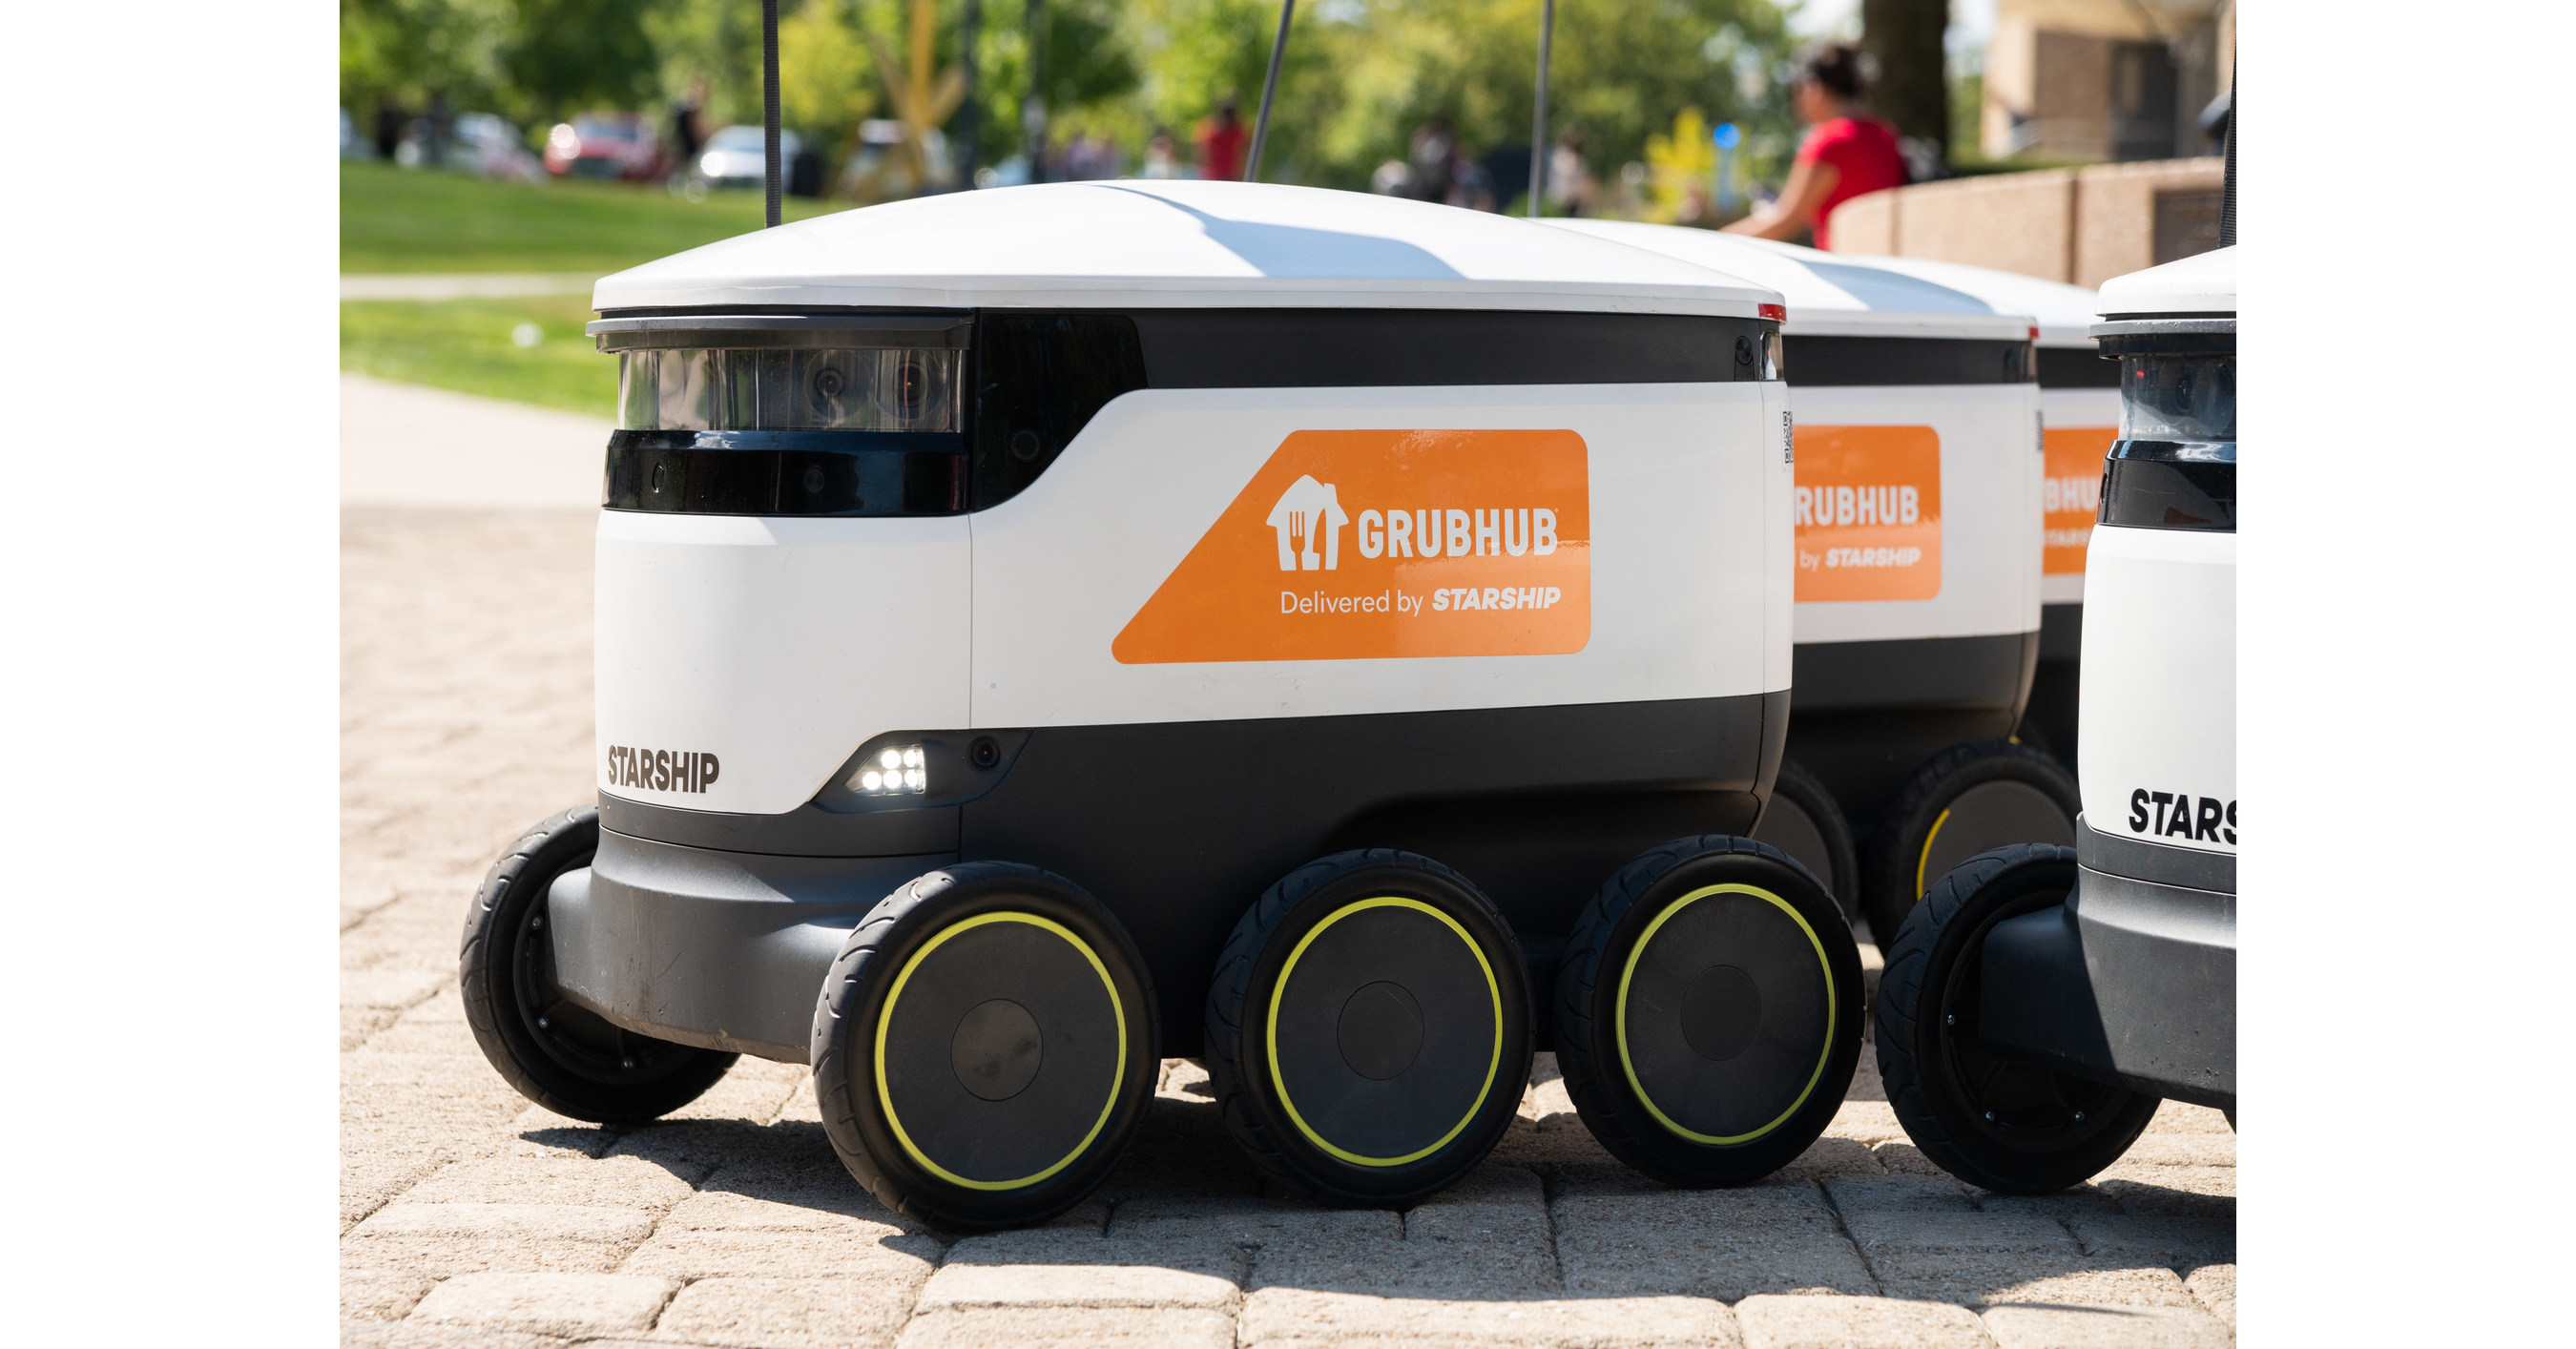 Grubhub Starship Technologies Partner to Bring Services to College Campuses